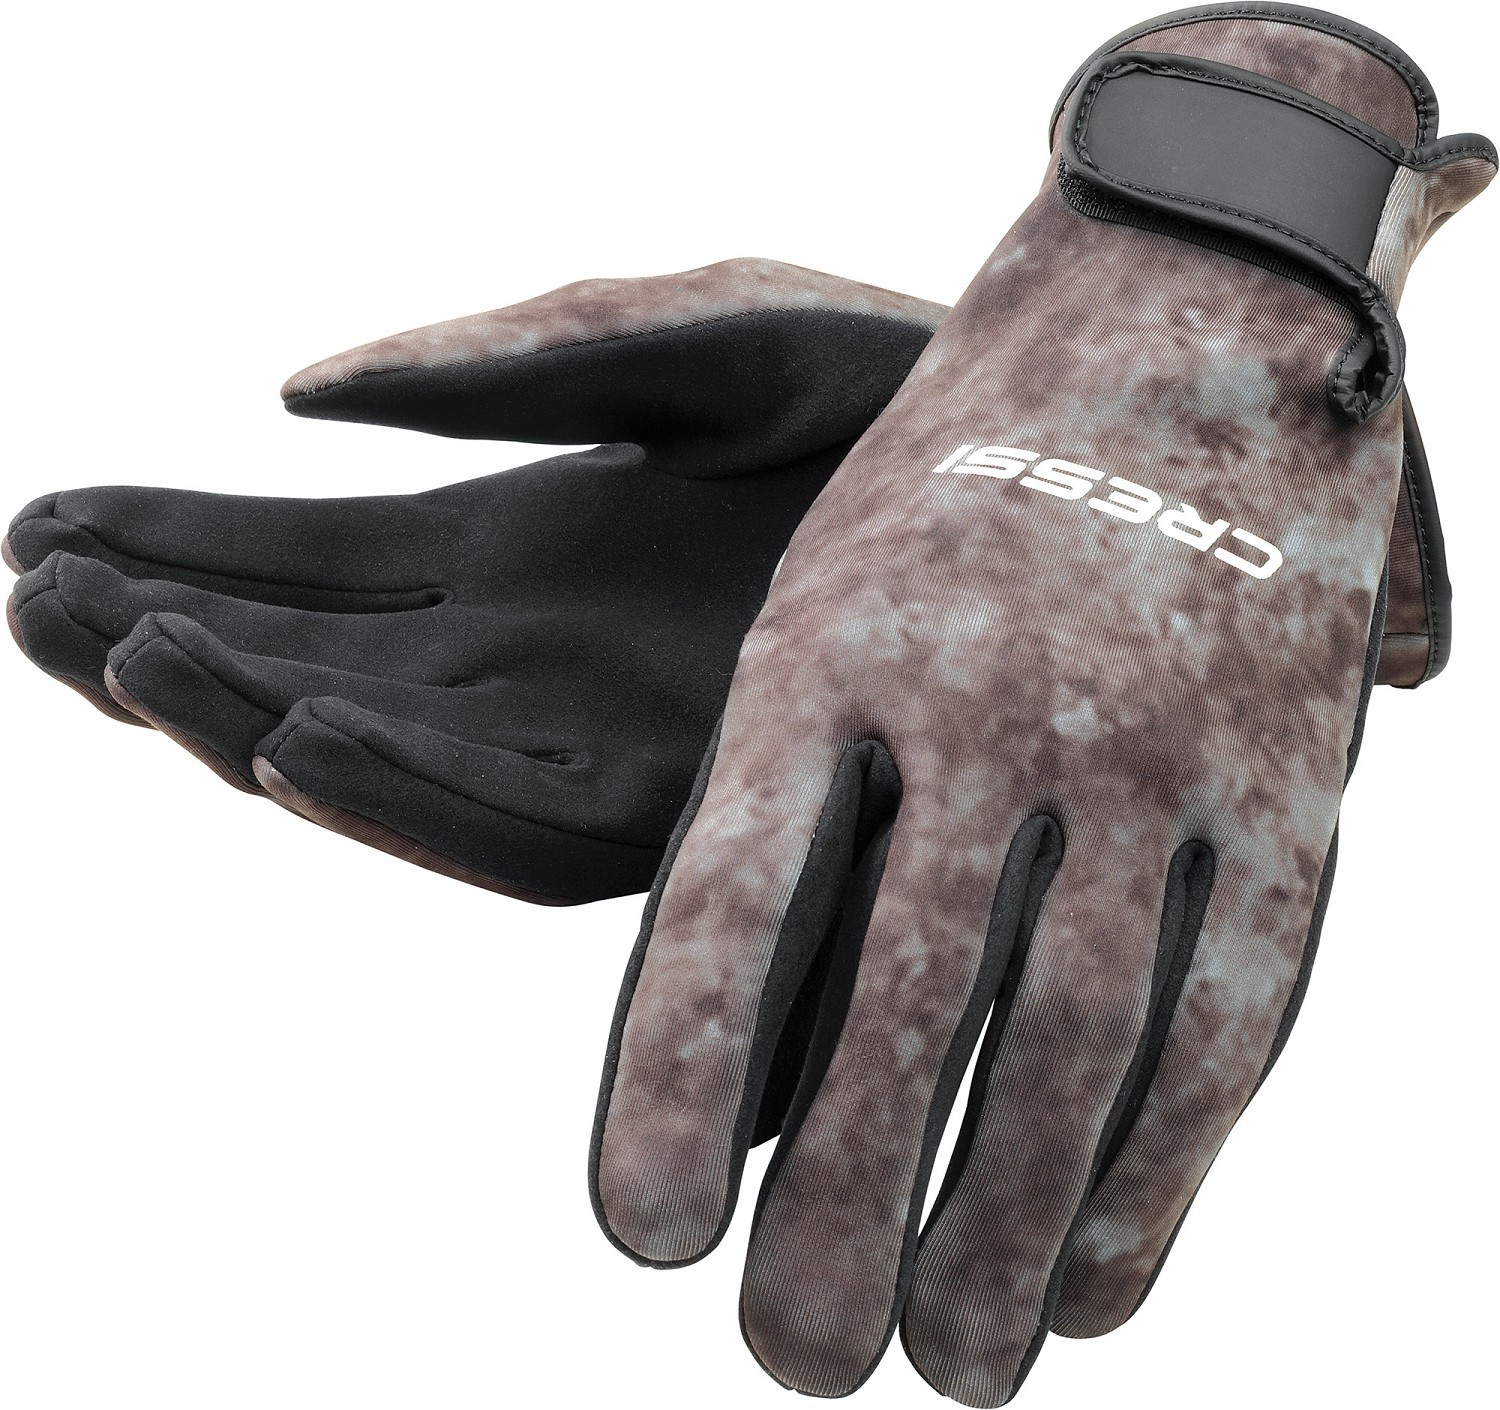 Cressi Tropical diving gloves